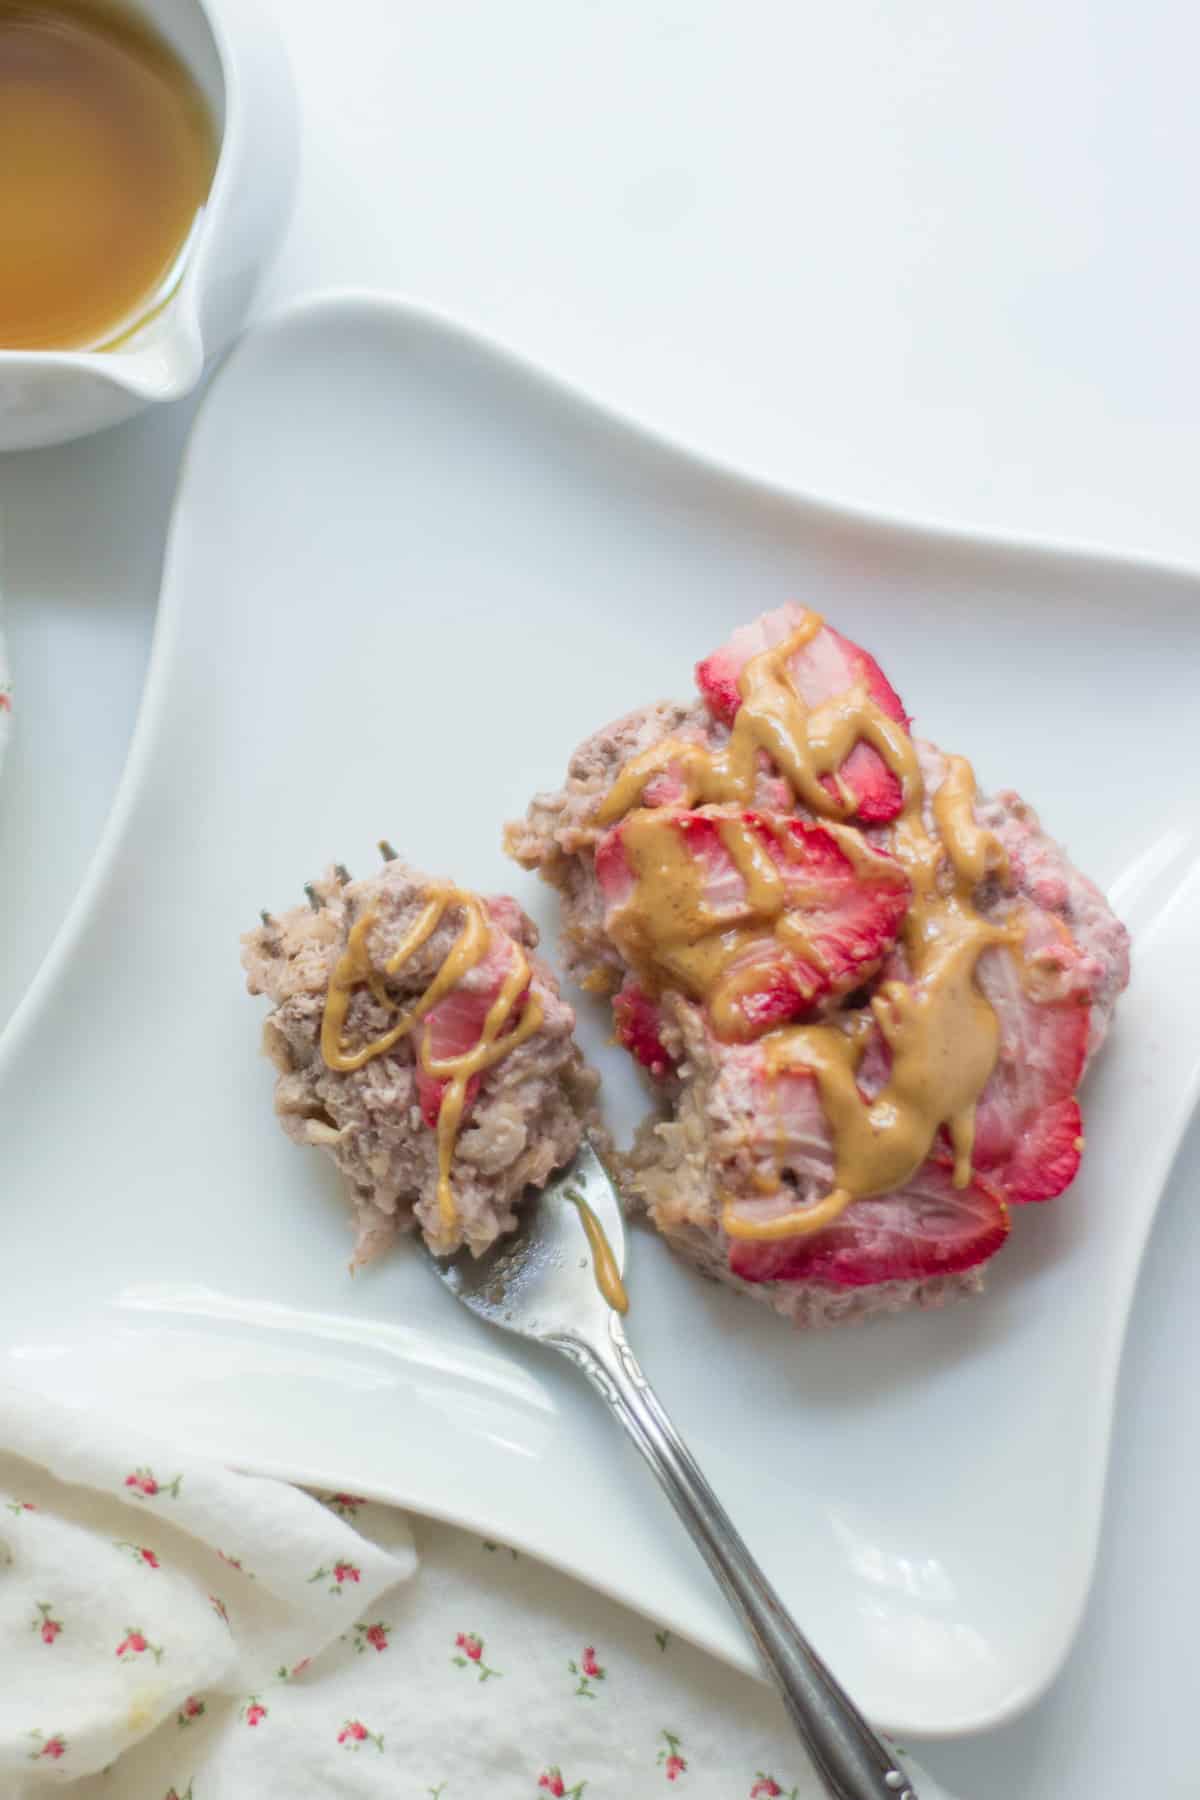 A slice of strawberry oatmeal on a plate with a drizzle of peanut butter and maple syrup.